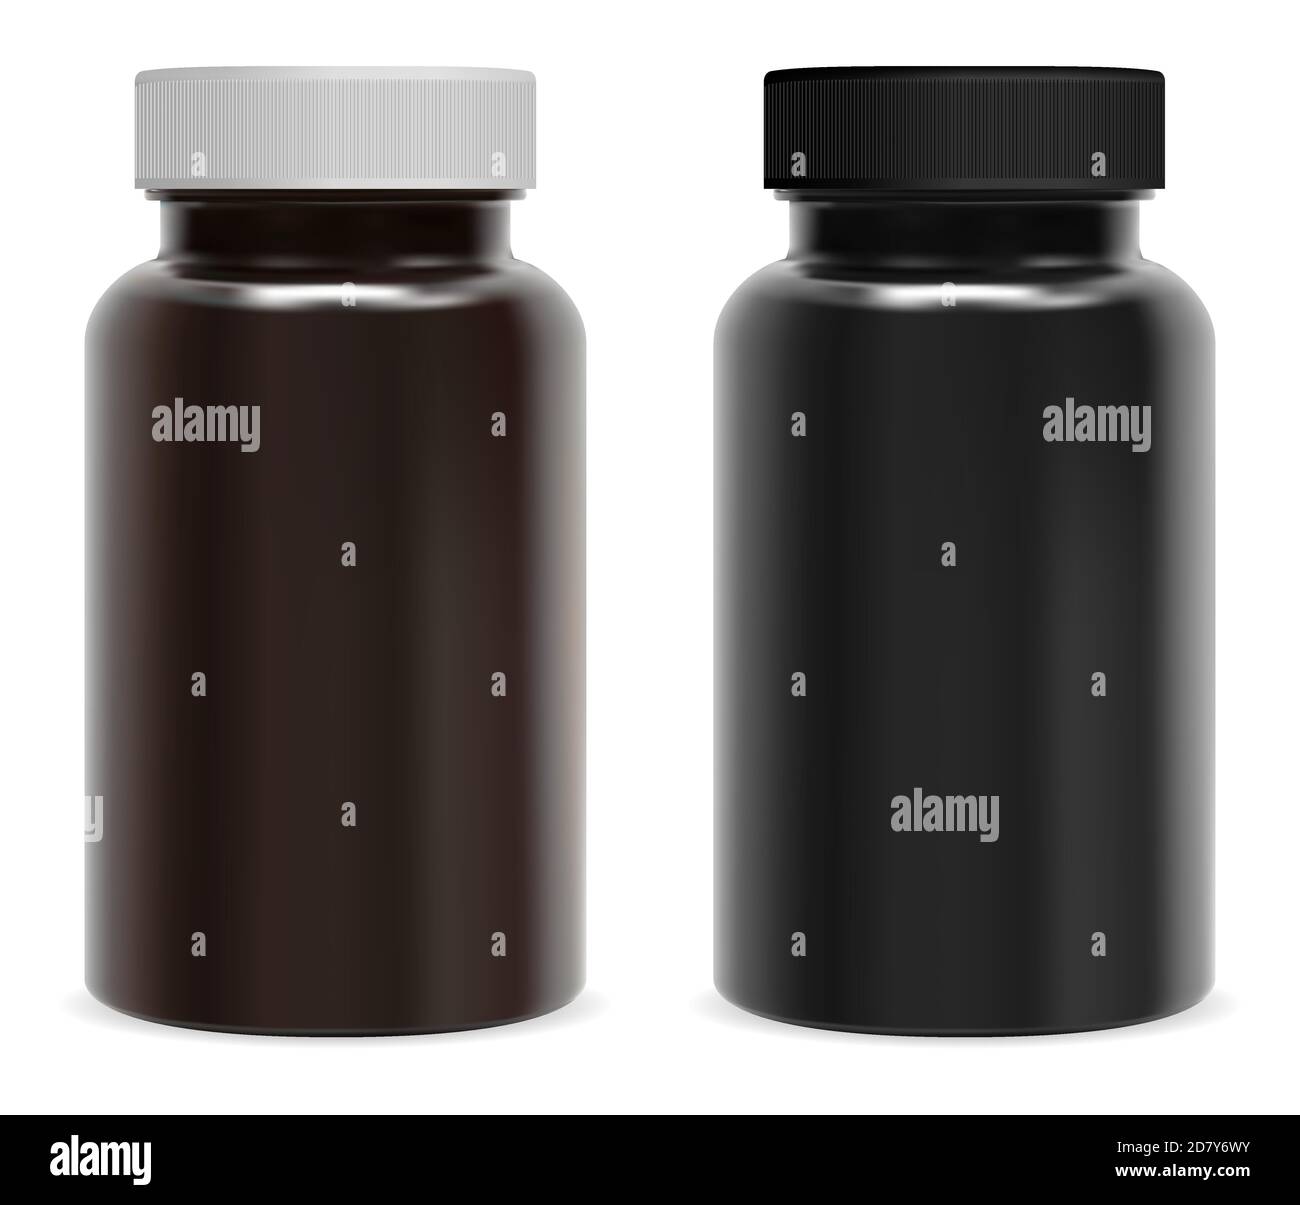 https://c8.alamy.com/comp/2D7Y6WY/supplement-pill-bottle-brown-amd-black-glossy-jarfor-vitamin-capsule-medicine-isolated-medical-cylinder-container-with-screw-cap-for-sport-tablet-e-2D7Y6WY.jpg